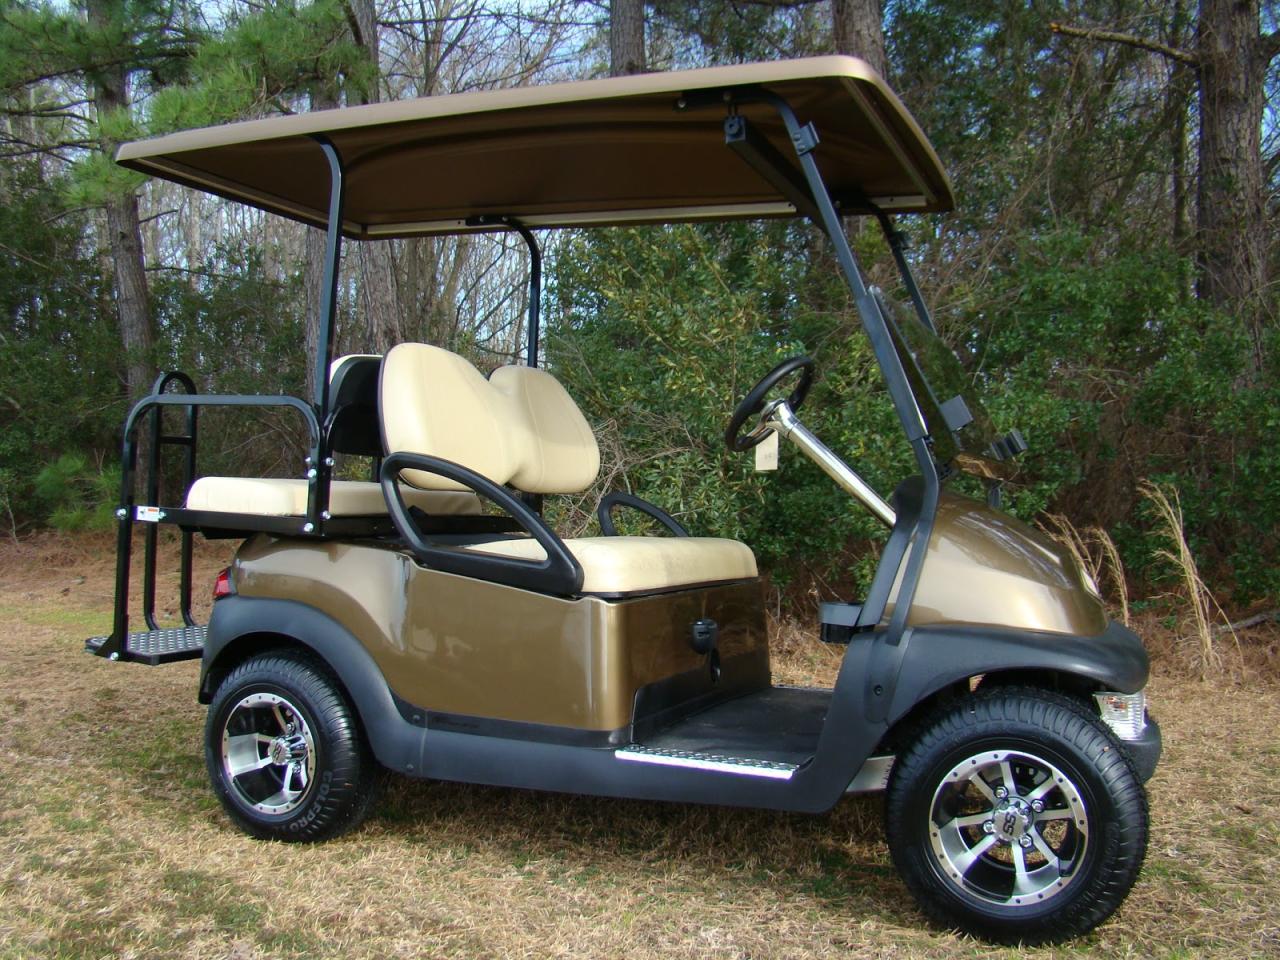 Discover Pre-Loved Golf Carts: Used Golf Carts for Sale by Owner in Los Angeles, California